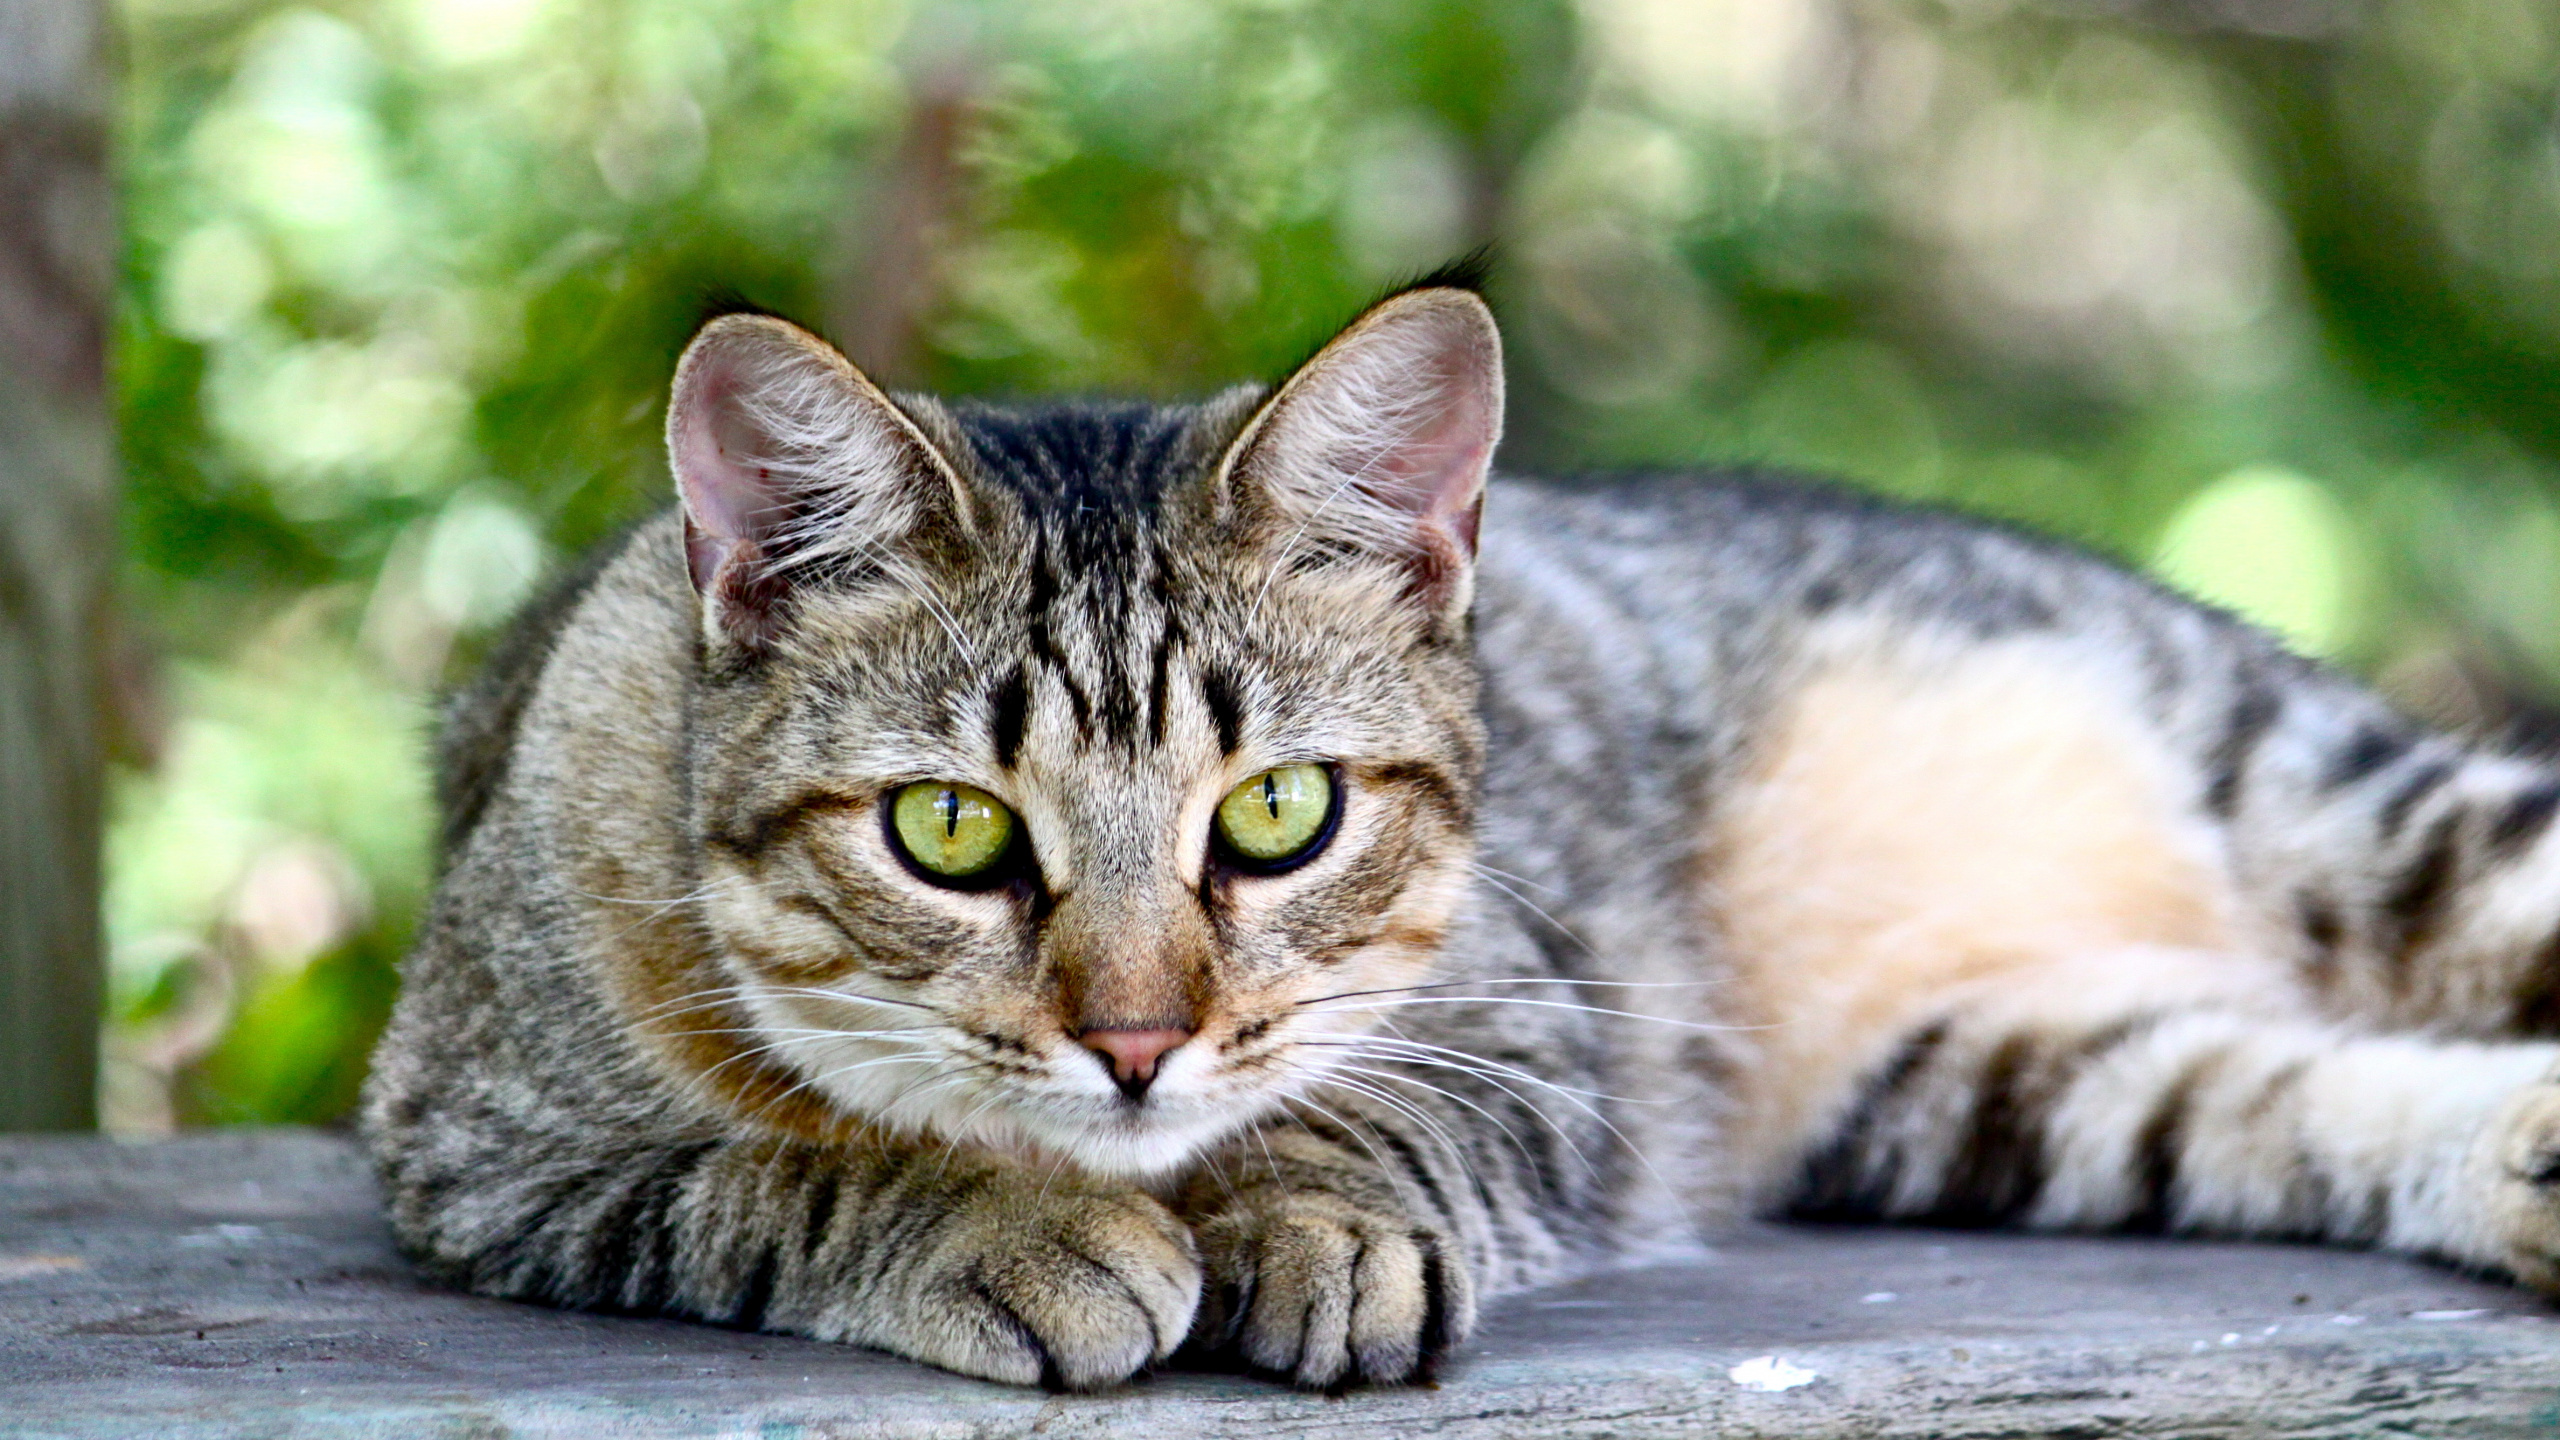 Brown Tabby Cat Lying on Wooden Surface. Wallpaper in 2560x1440 Resolution